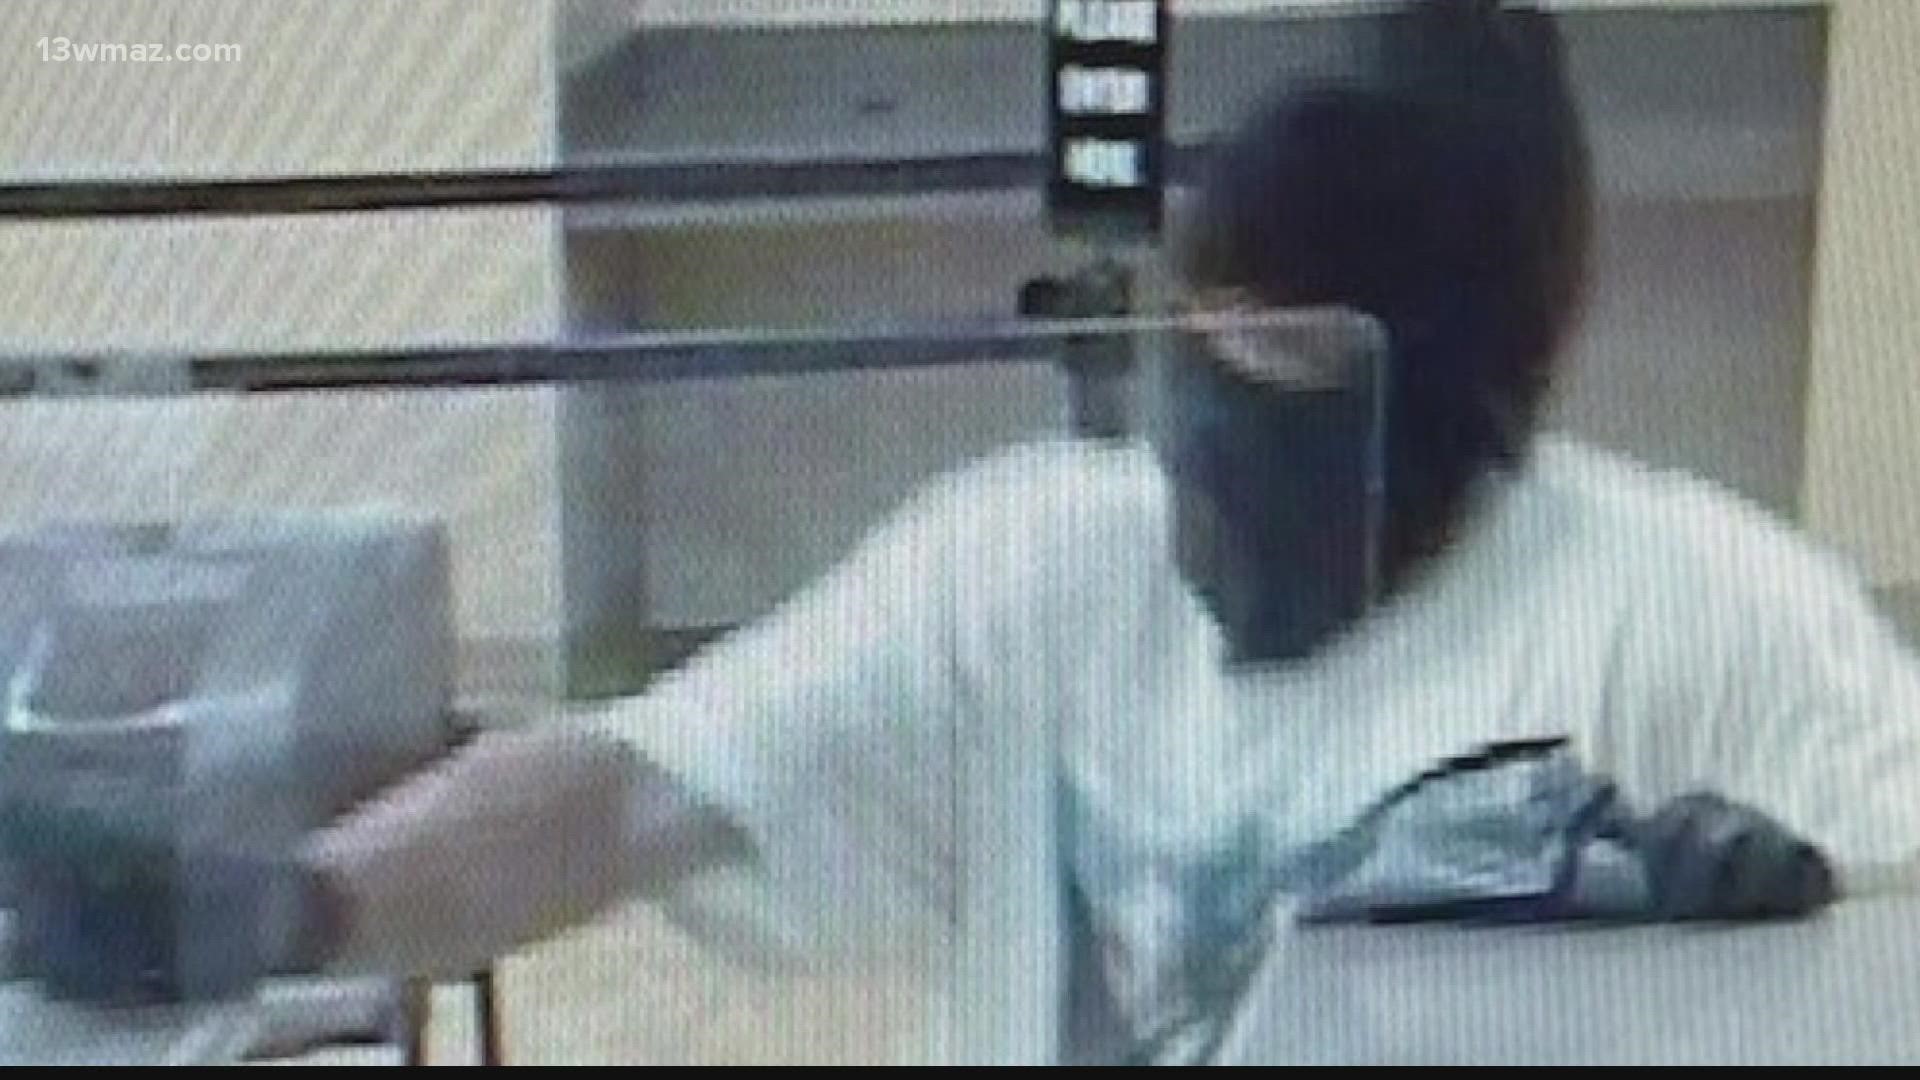 The Warner Robins Police Department is looking for a man who robbed a bank and shot someone early Monday morning.